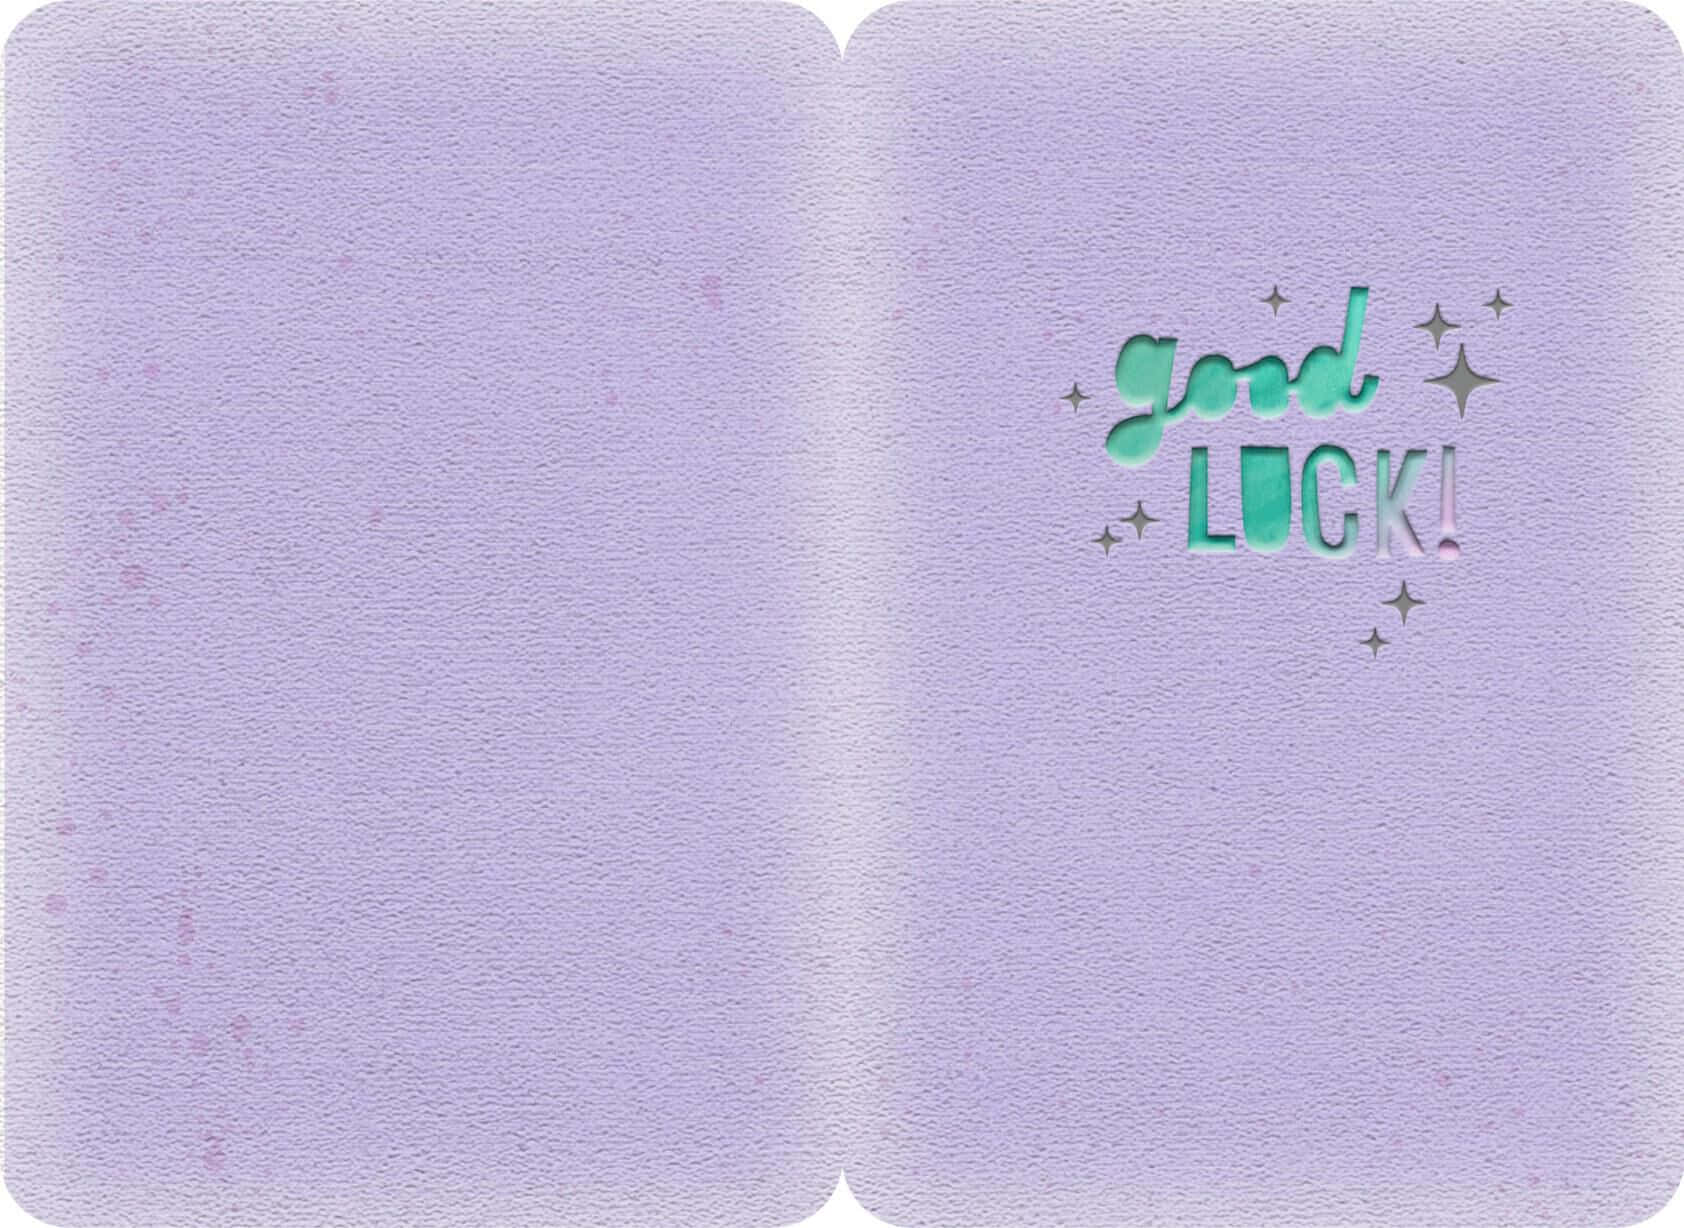 A Purple Notebook With The Words Good Luck On It